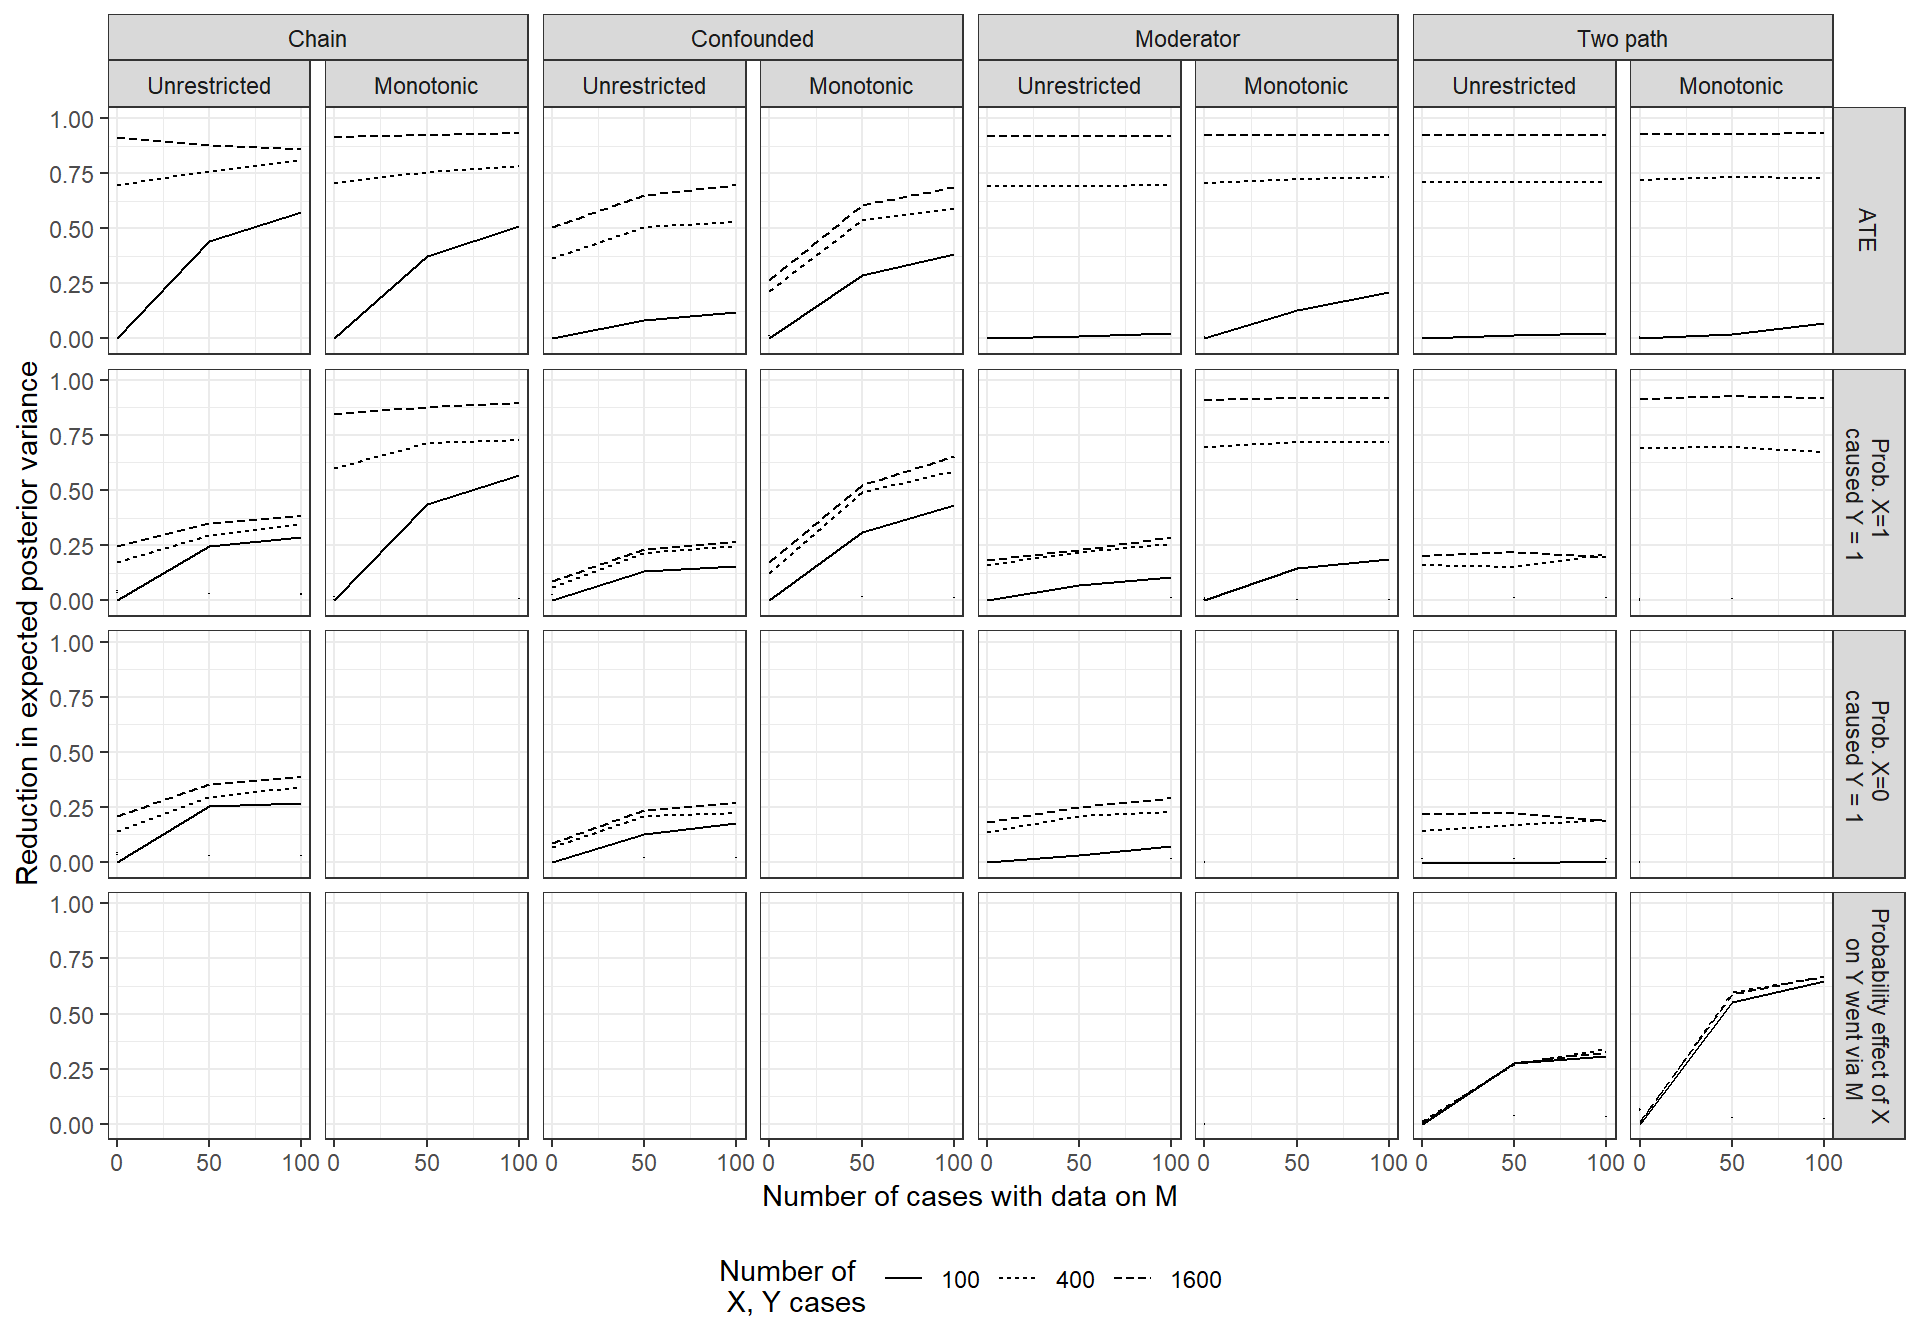 Reduction in expected posterior variance for different wide versus deep strategies, given different model-query combinations. Reductions are relative to the expected posterior variance for an N=100, no process-tracing strategy.